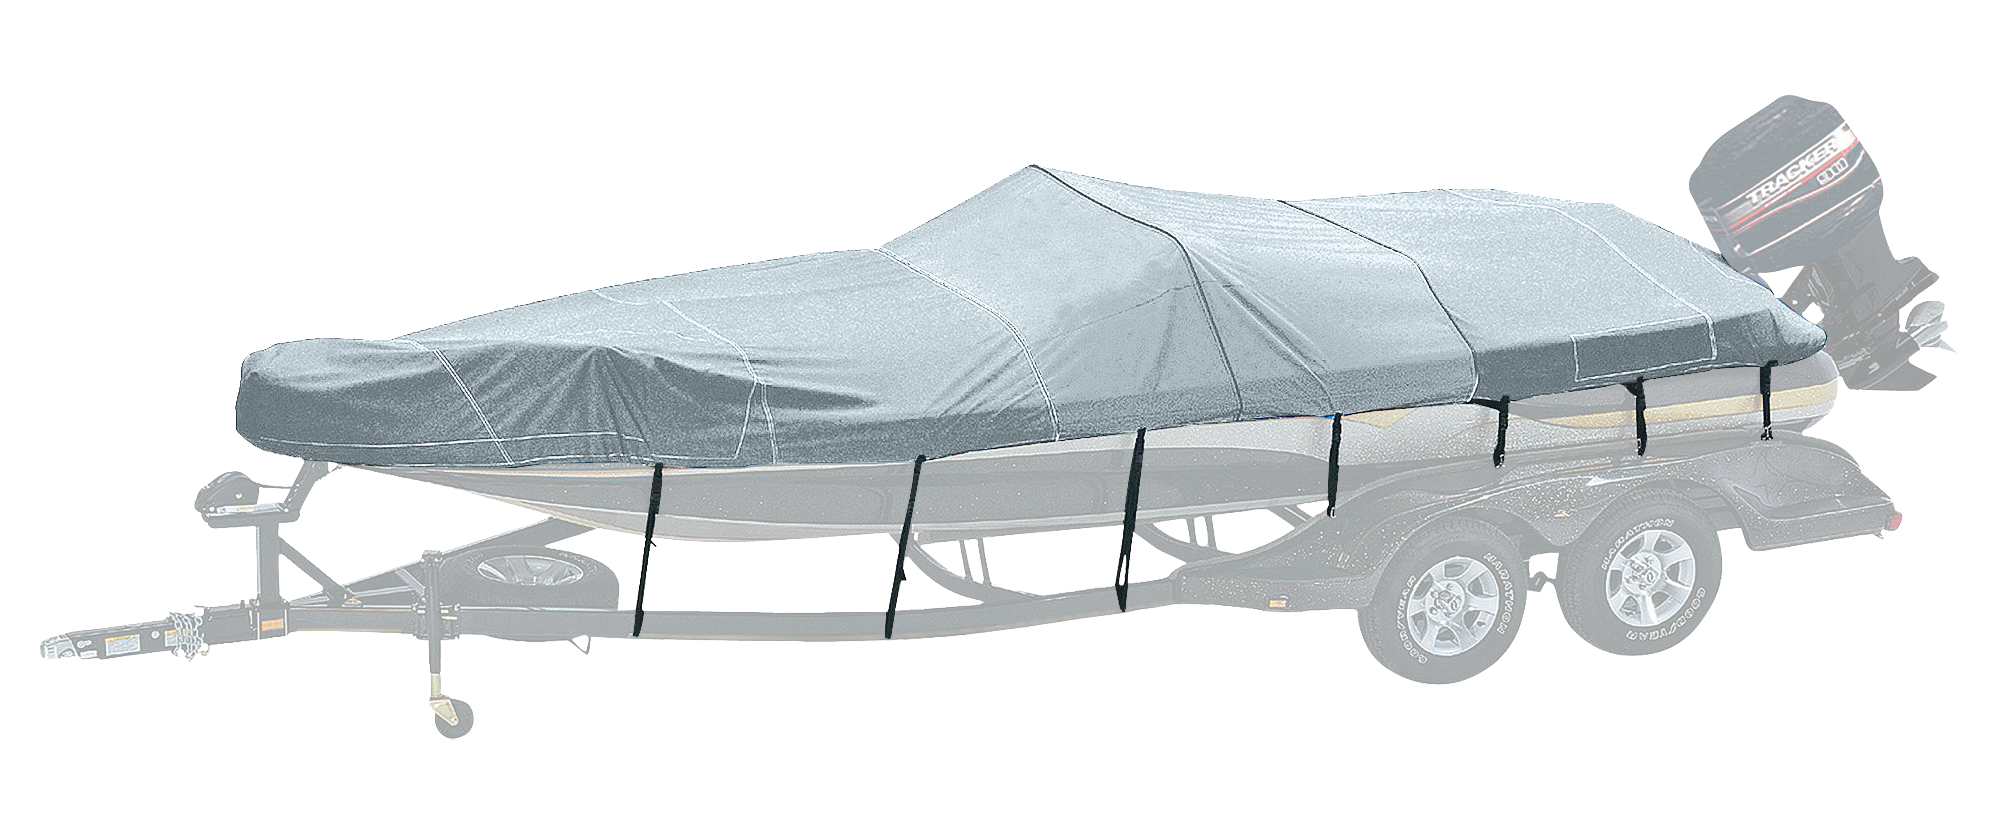 Bass Pro Shops Exact Fit Boat Cover by Westland - Tahoe - 2005 228 Deckboat I/O - Silver